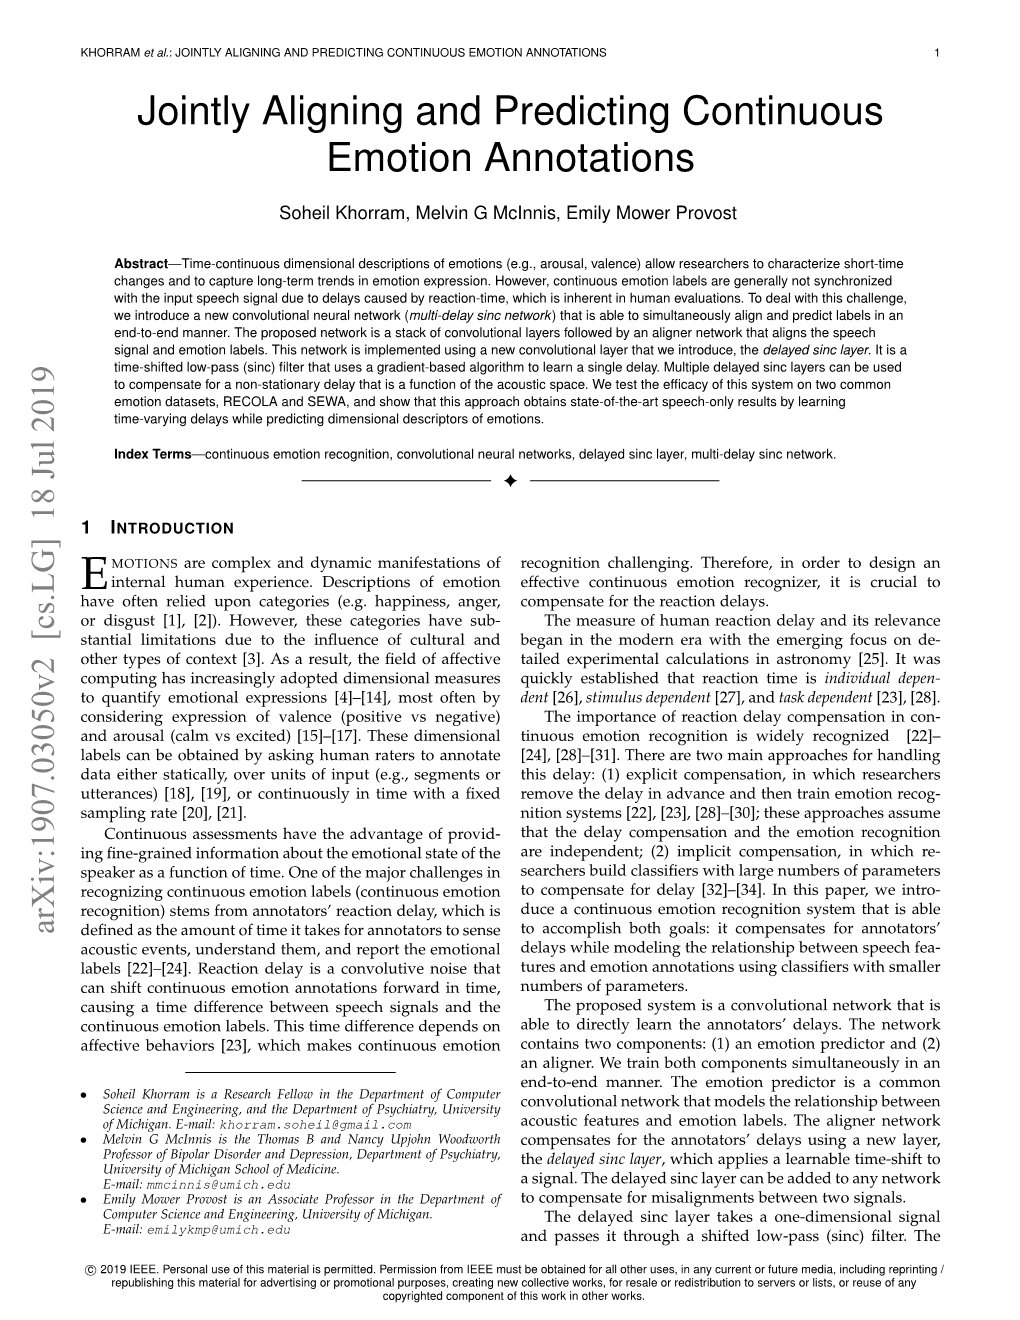 JOINTLY ALIGNING and PREDICTING CONTINUOUS EMOTION ANNOTATIONS 1 Jointly Aligning and Predicting Continuous Emotion Annotations